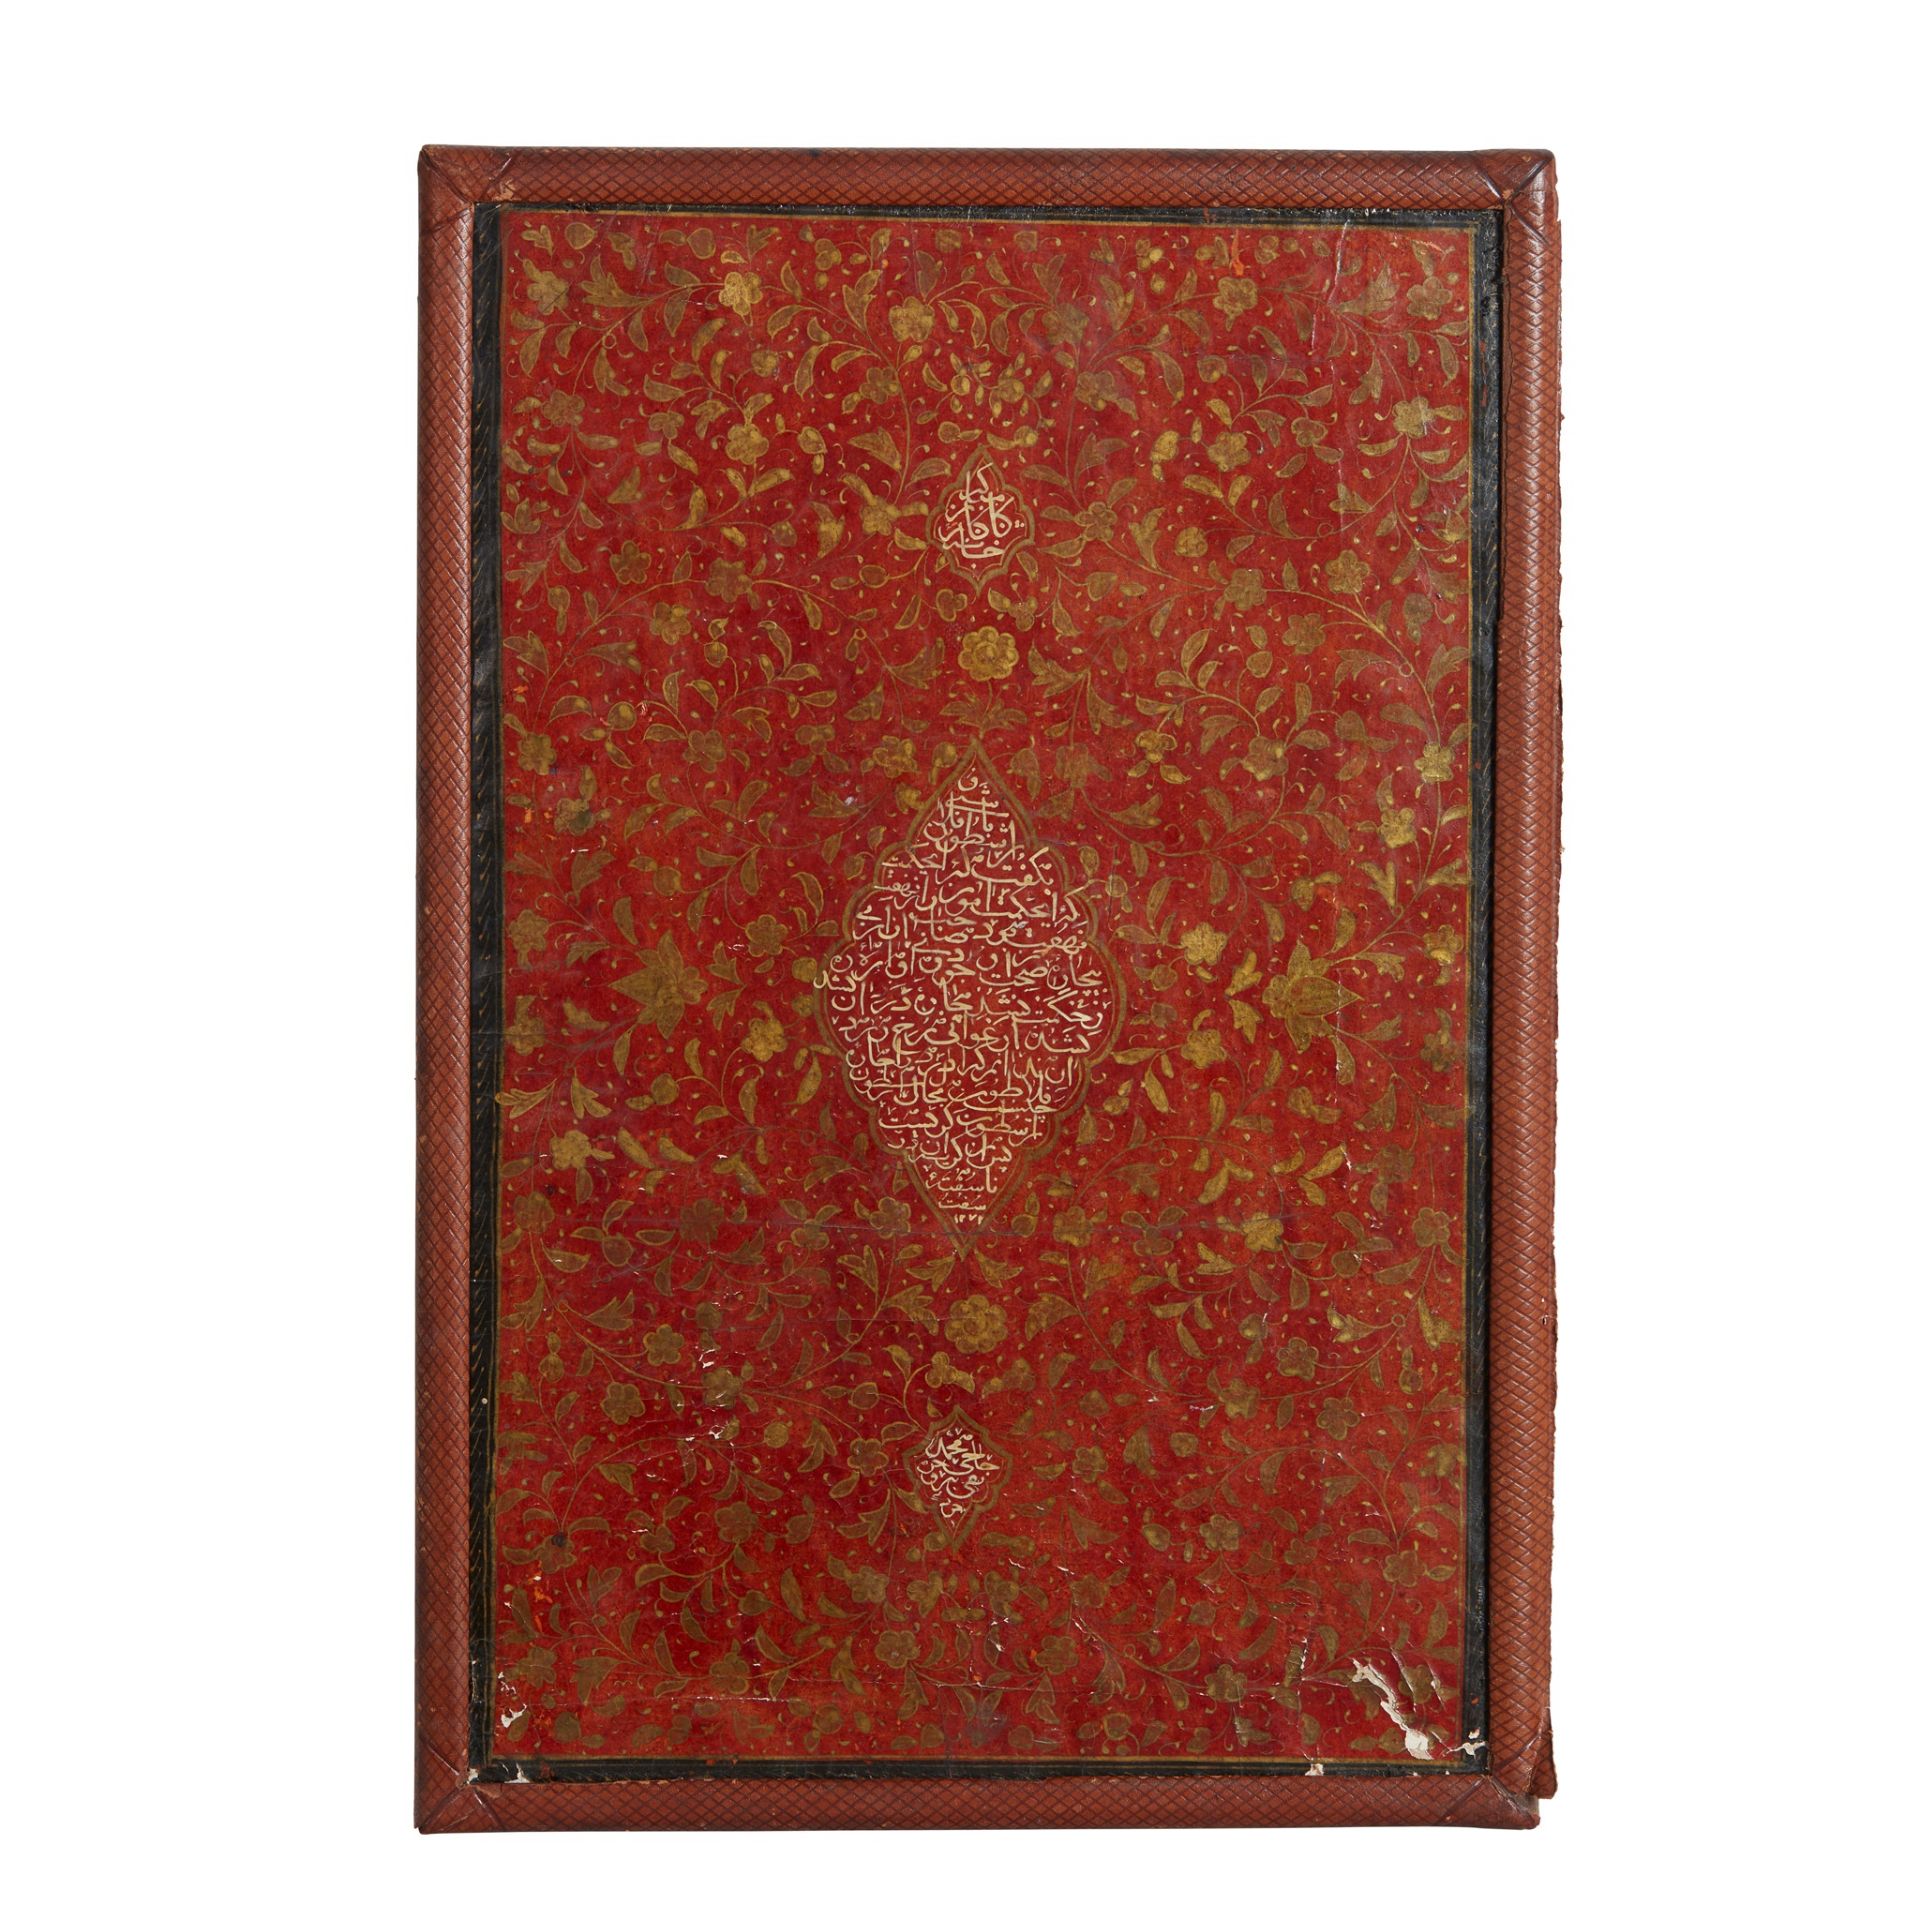 TWO QAJAR LACQUERED LEATHER PAPIER MACHE BOOK COVERS PERSIA, 19TH CENTURY - Image 5 of 5